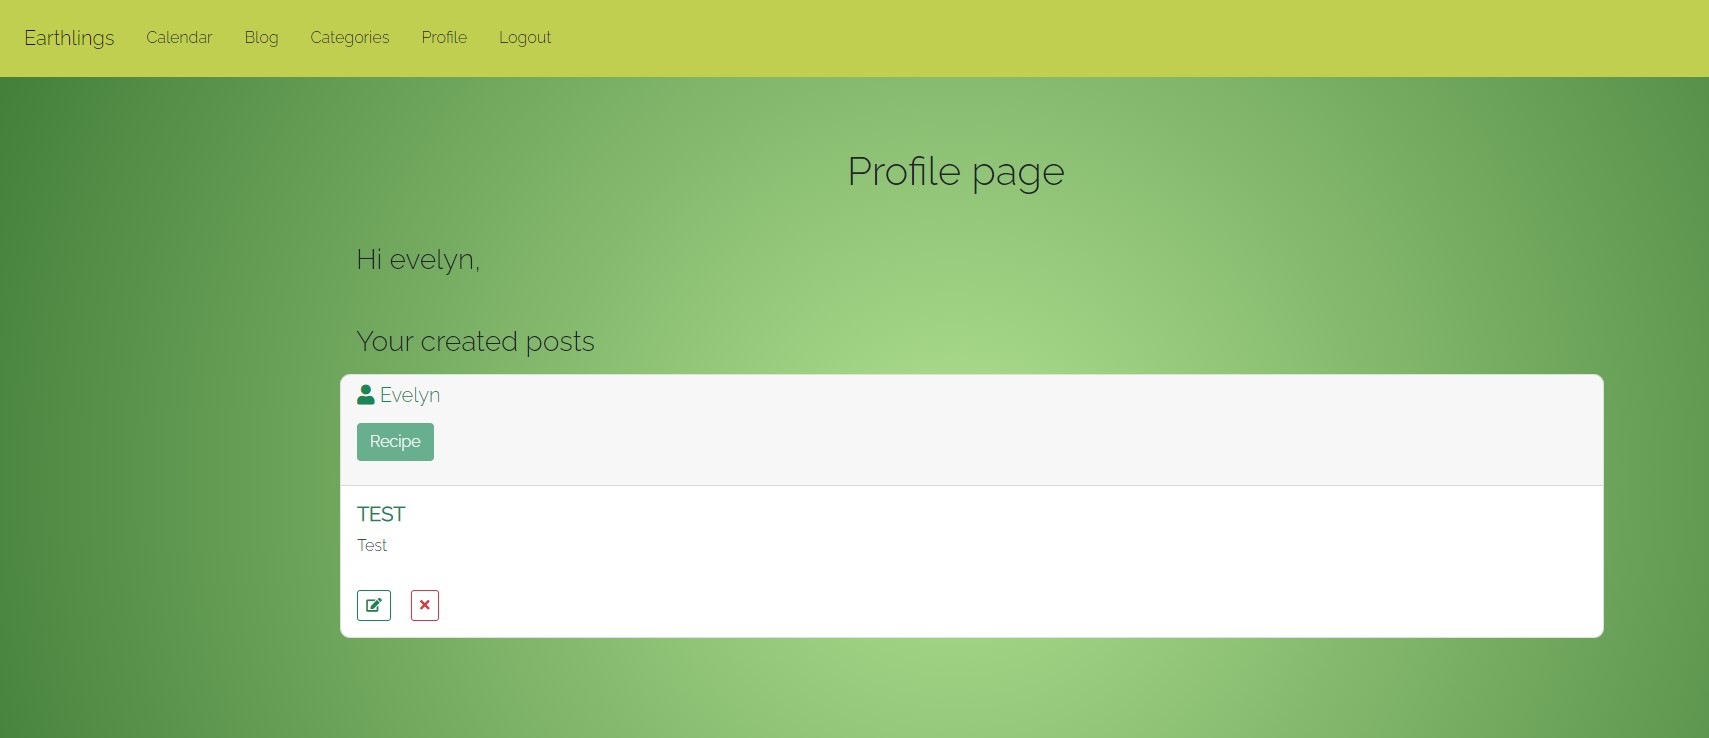 Image of the Profile page